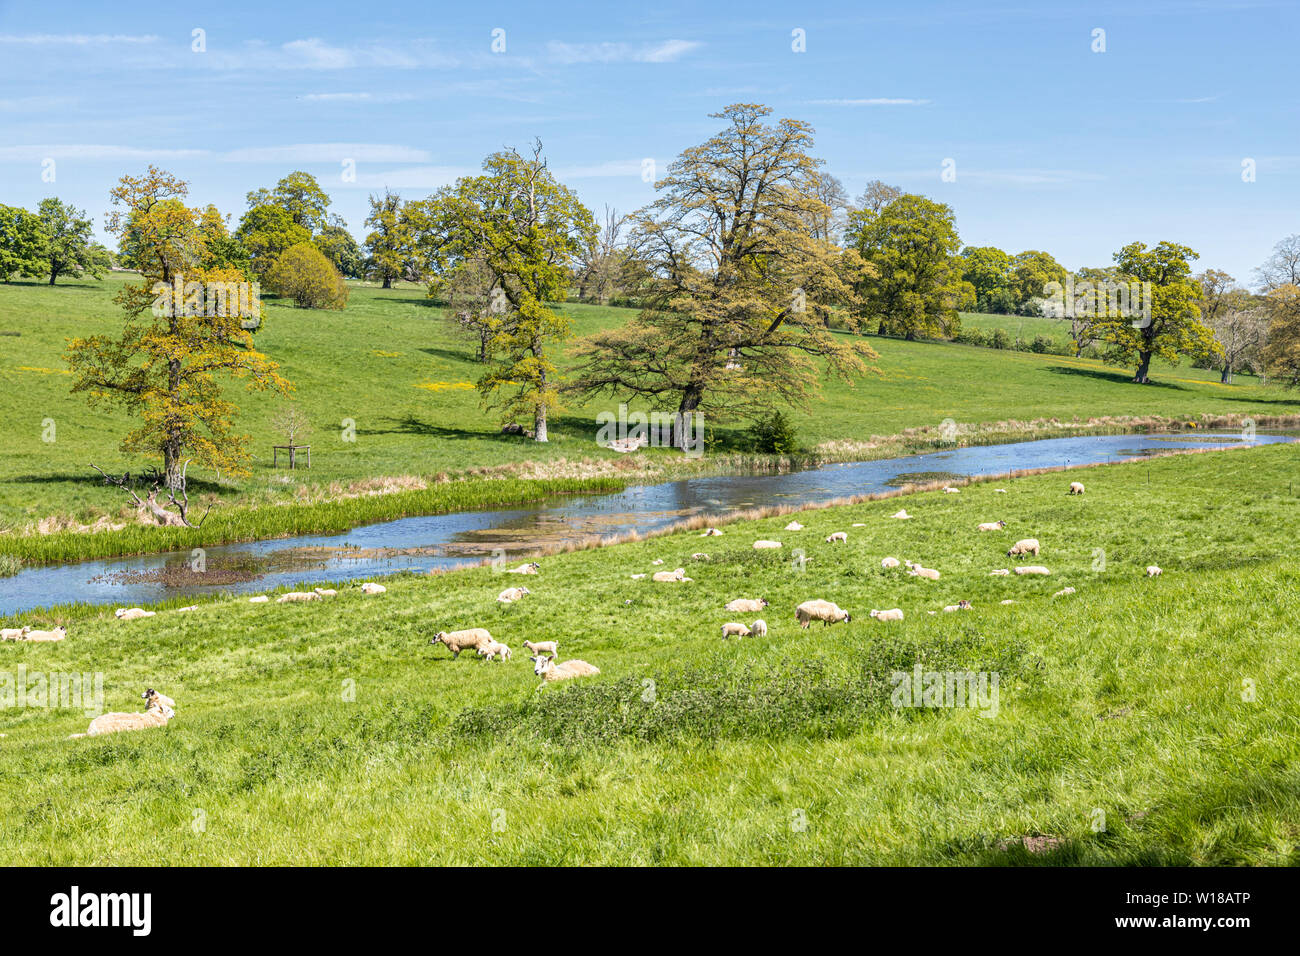 Sheep and lambs grazing the water meadows beside the Sherborne Brook near the Cotswold village of Sherborne, Gloucestershire UK Stock Photo